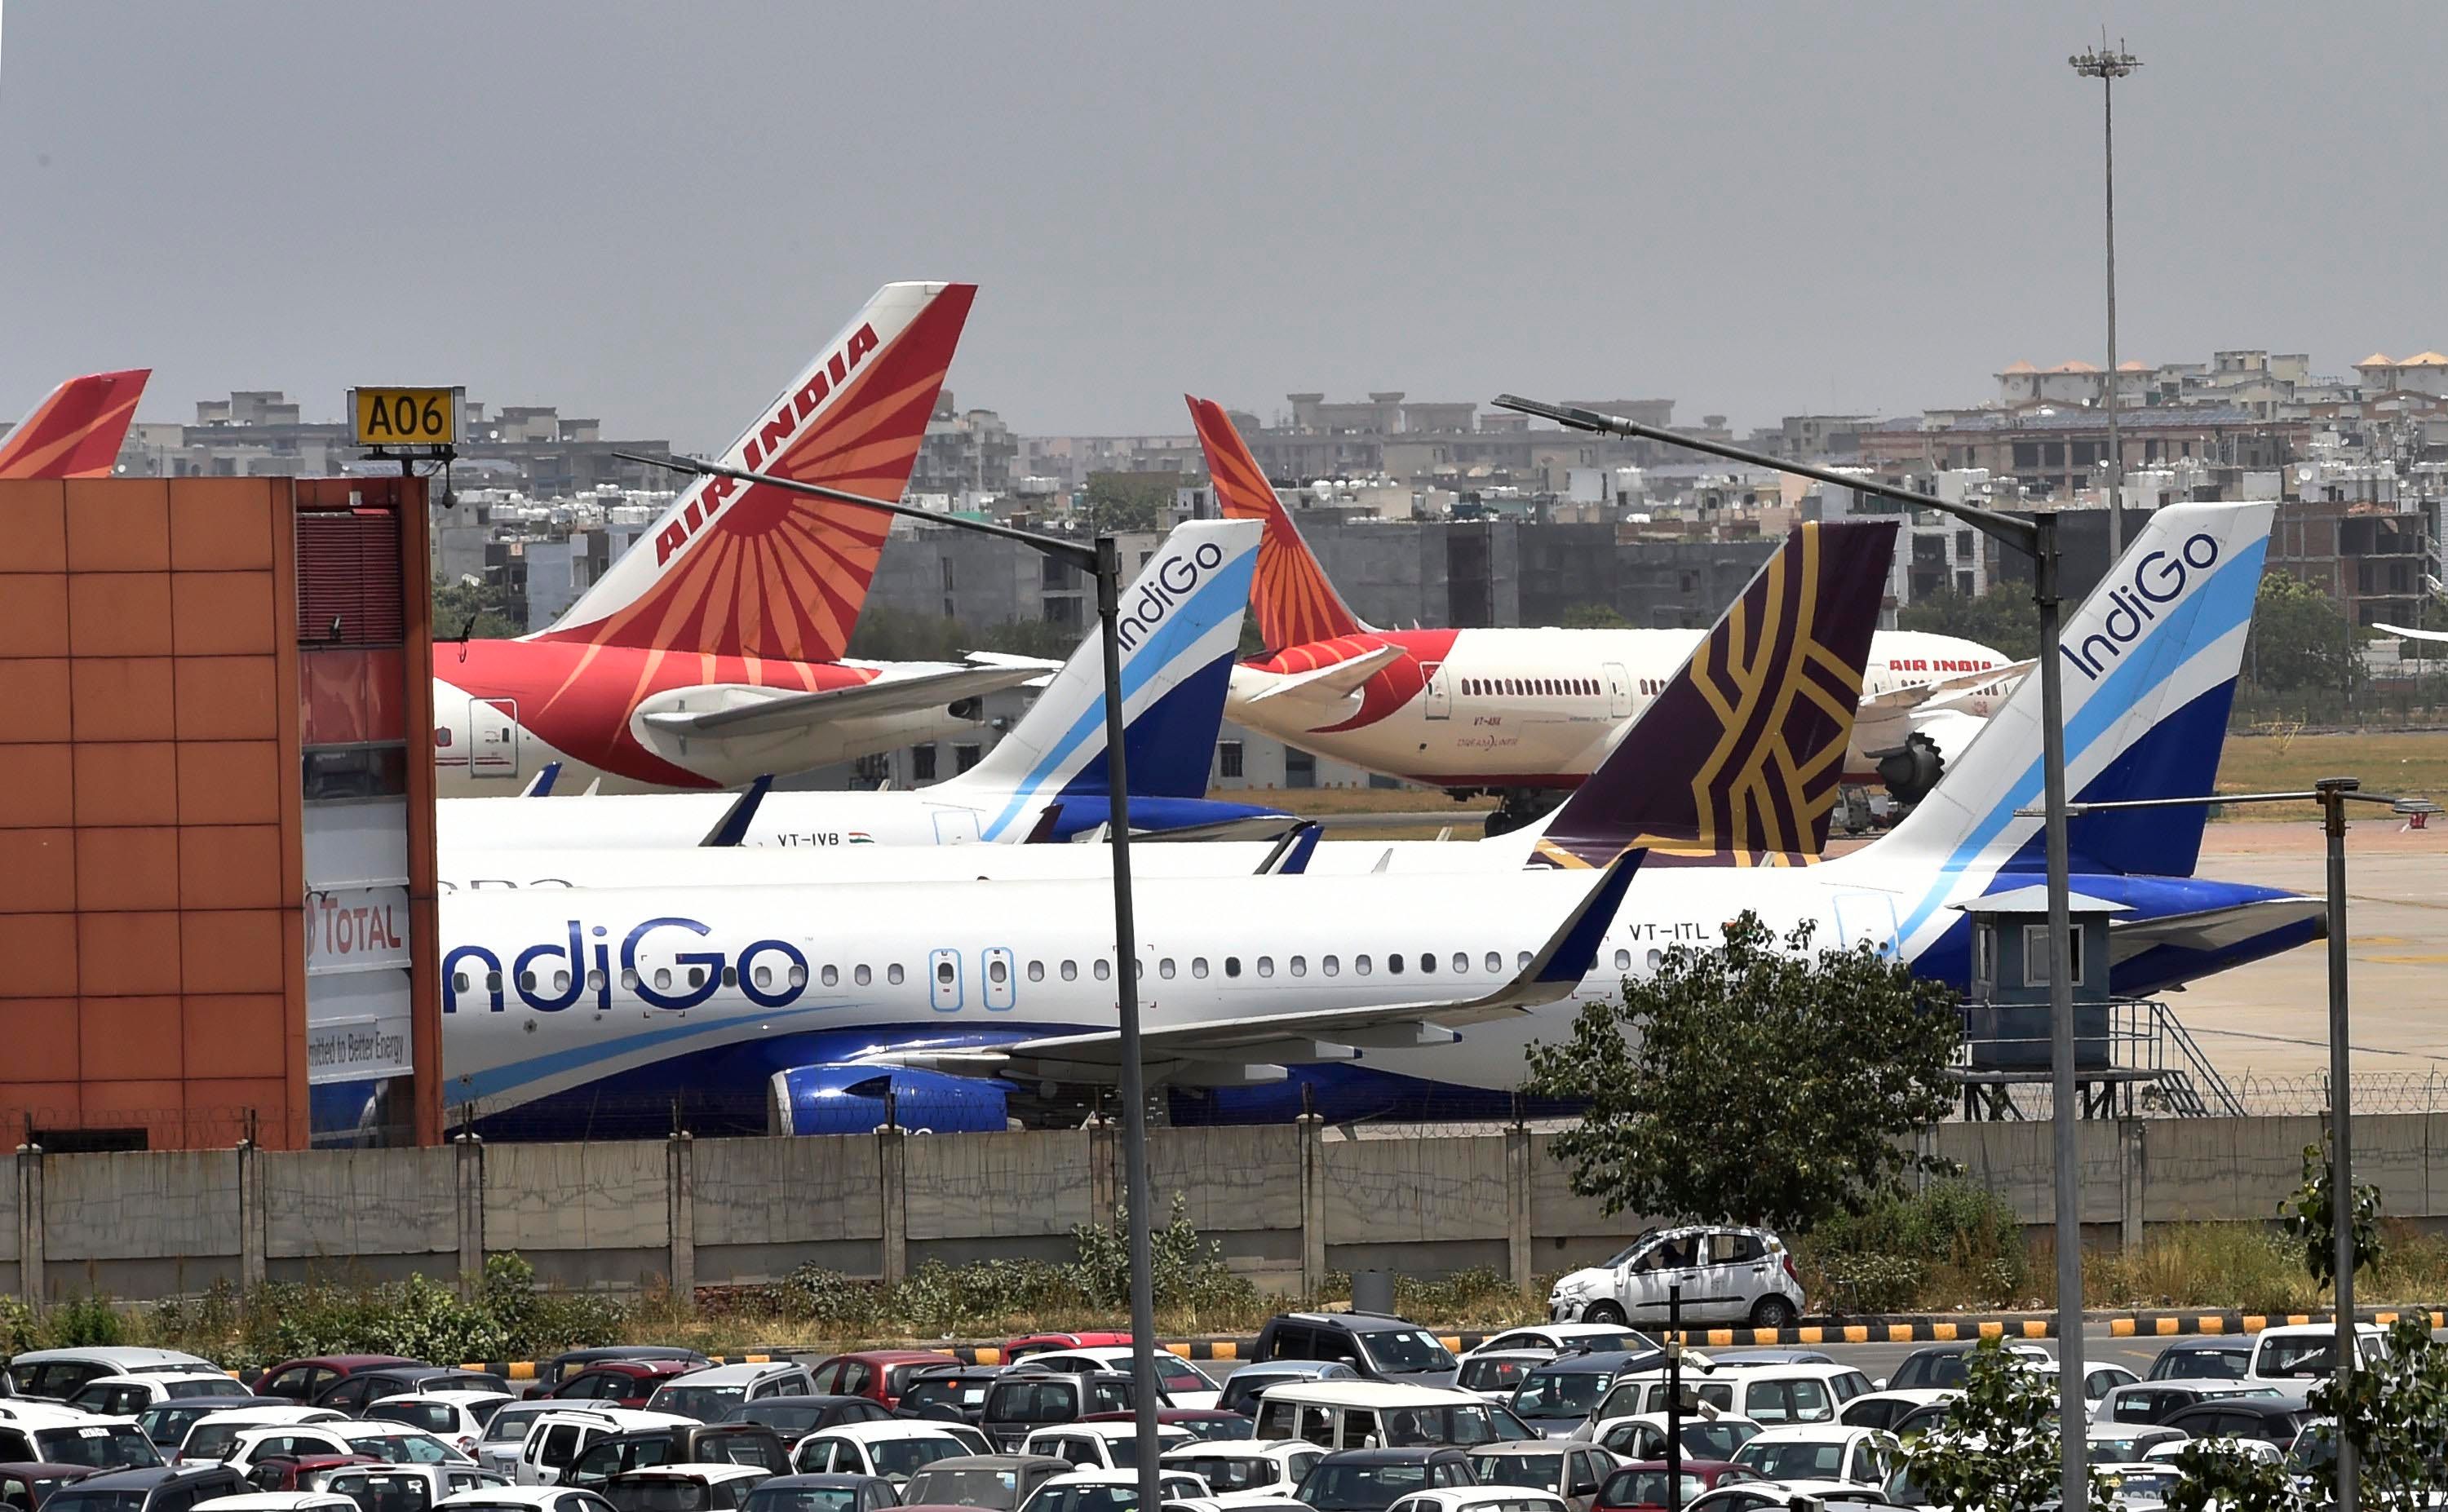 Tails of Indian aircraft parked at Delhi airport 